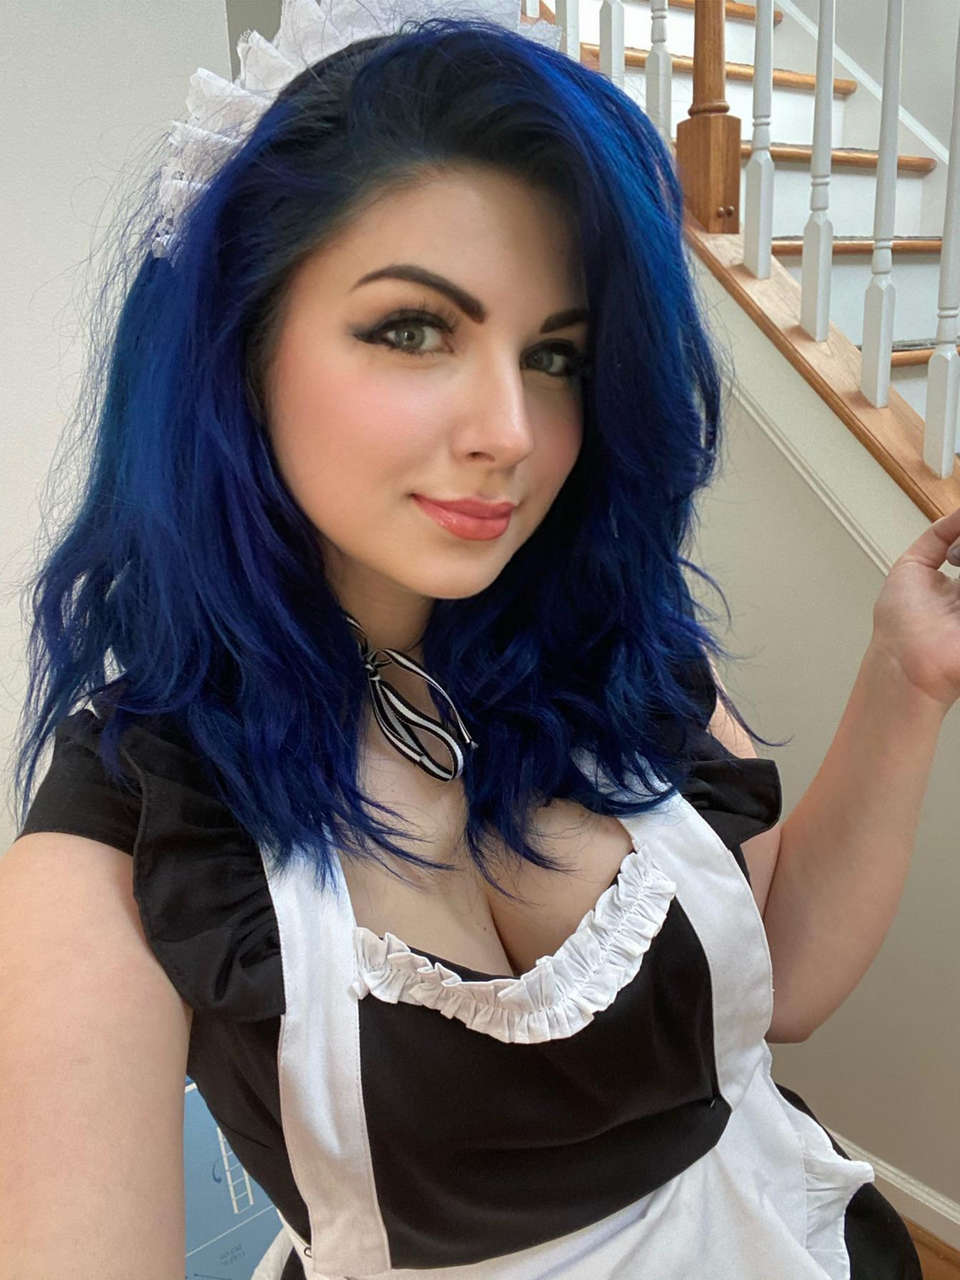 Self If You Went To A Maid Cafe Would You Pick A Server With Blue Hai